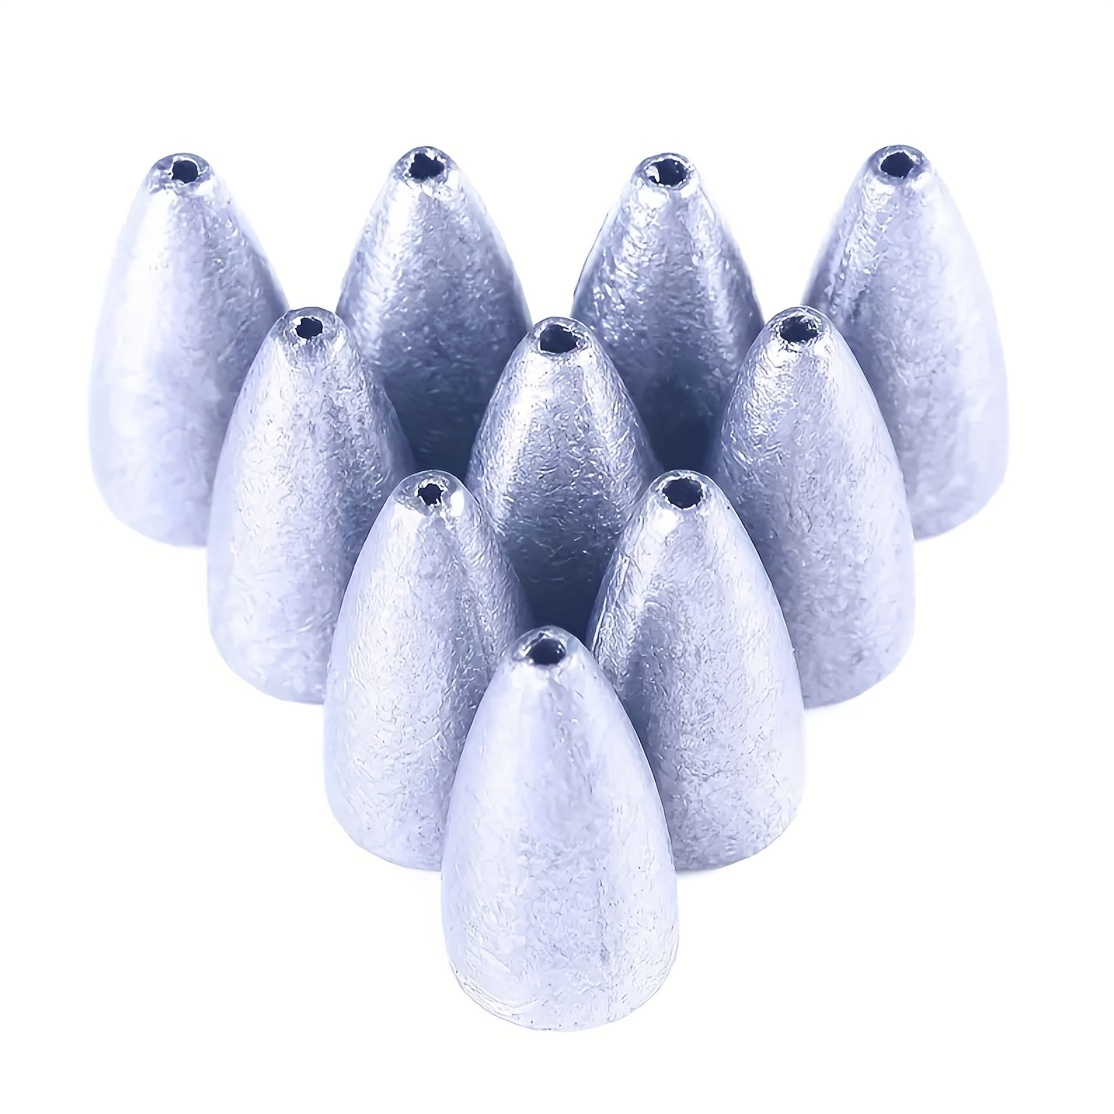 Fishing Sinkers Weight Set Fishing Sinker Fishing Weights Sinkers Kit  Angler Tackle Accessory Fishing Iron Weights, 20pcs Outdoor Fishing Sinkers